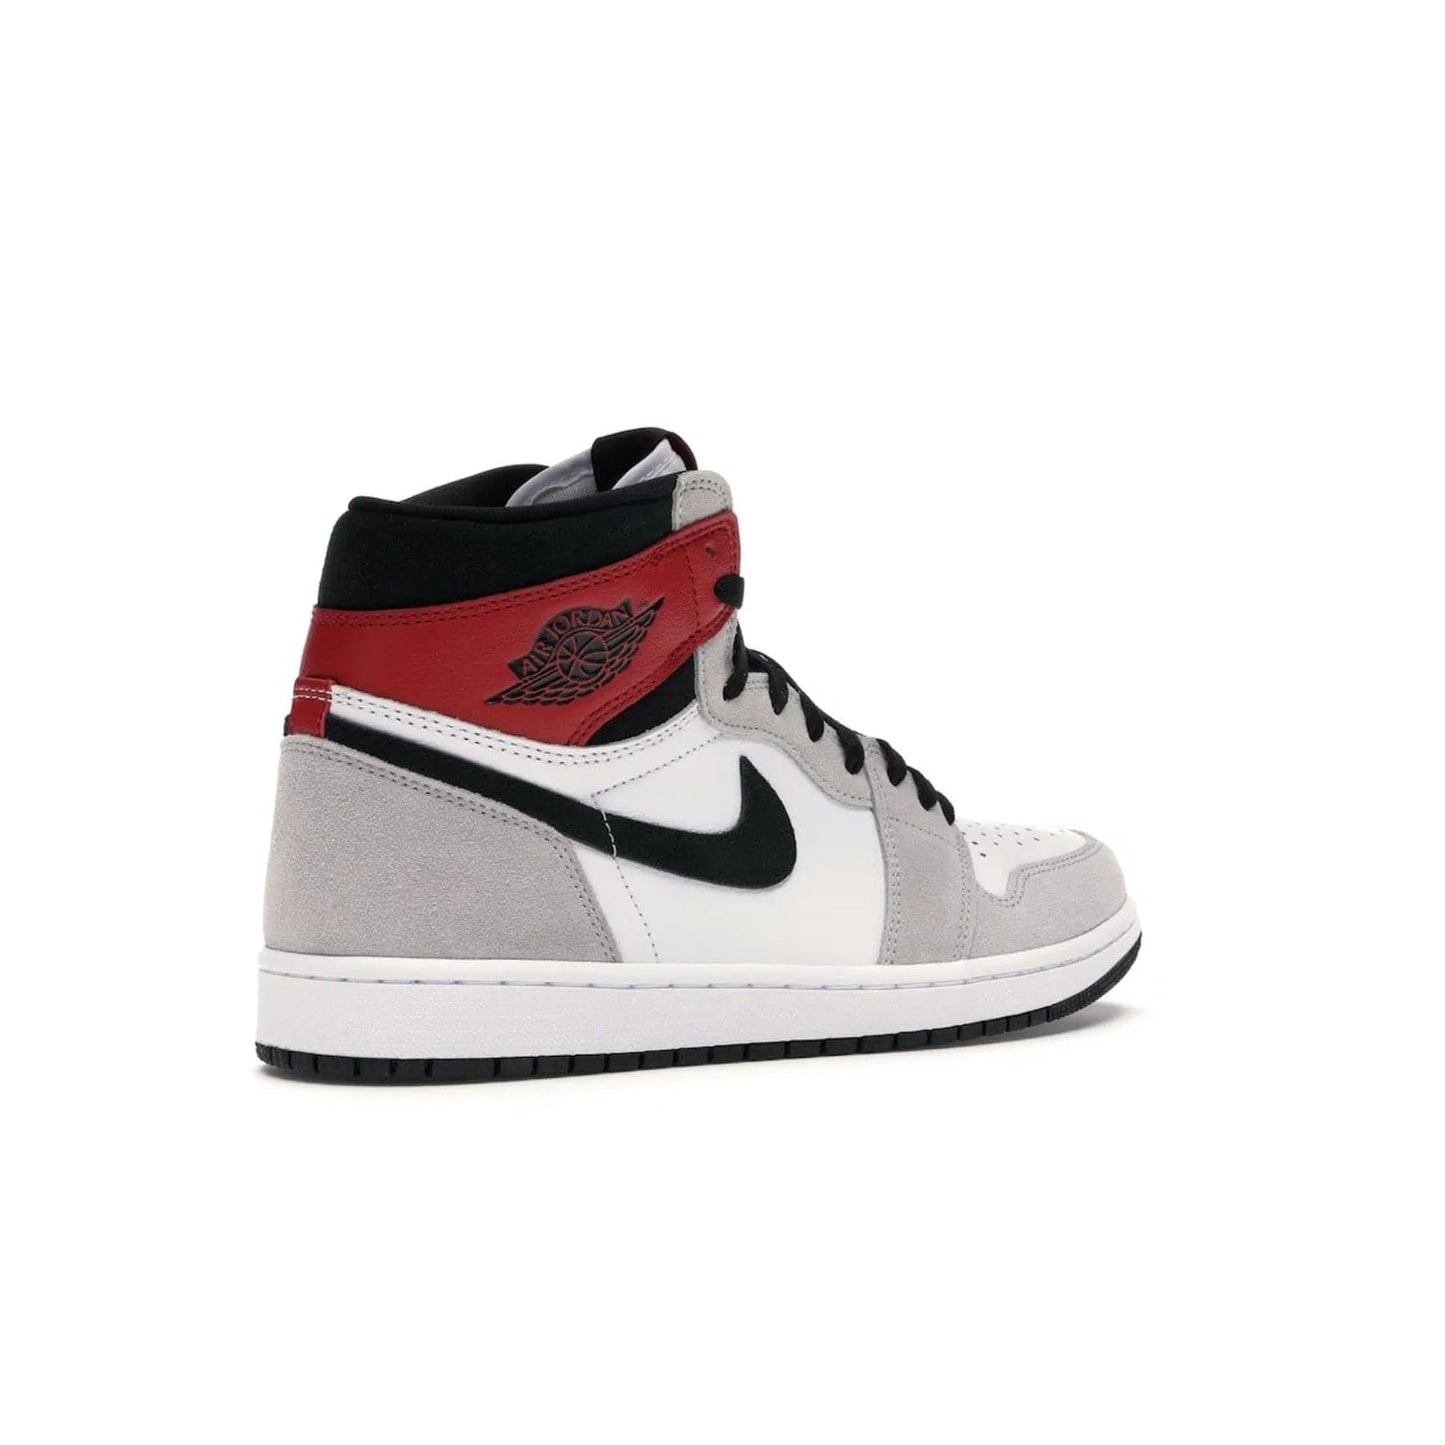 Jordan 1 Retro High Light Smoke Grey - Image 33 - Only at www.BallersClubKickz.com - Comfortable and stylish, Jordan 1 Retro High Light Smoke Grey offers a unique spin on a classic design. White leather, grey suede, red leather and black details are set on a white midsole and black outsole. Get the sneaker released in July 2020 and add a twist to your wardrobe.